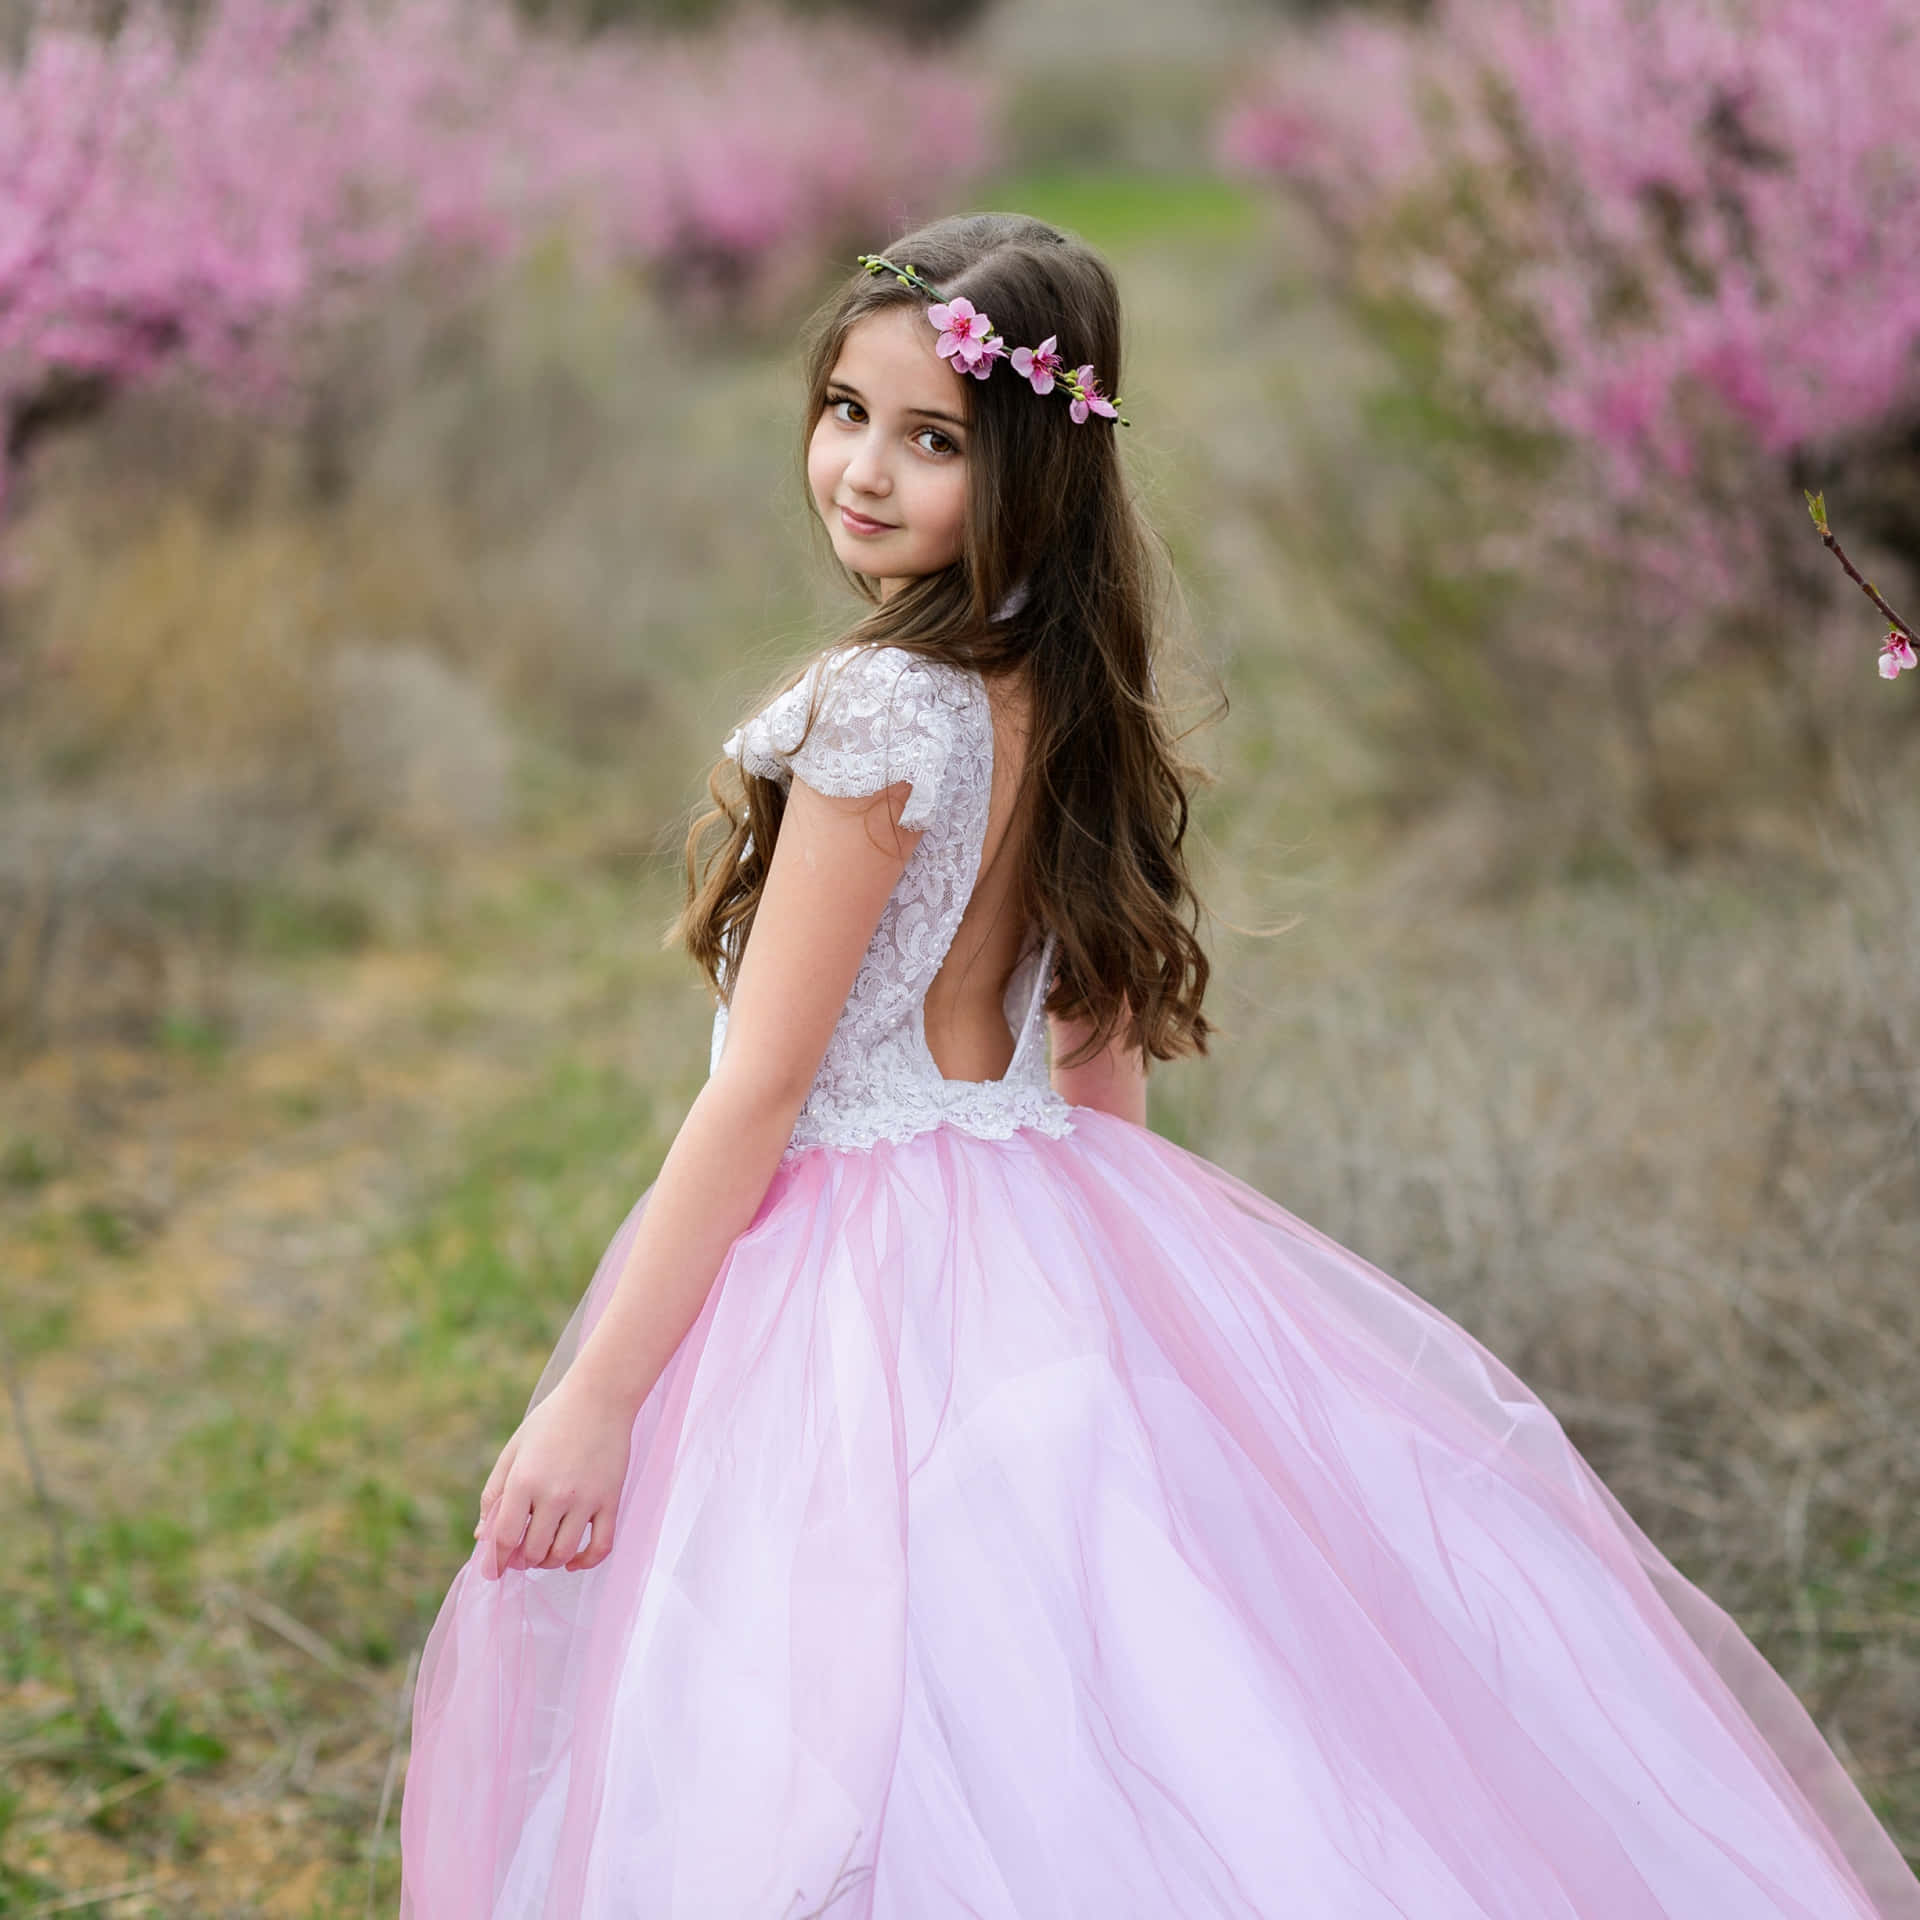 Pretty Girl In A Pink Princess Dress Background